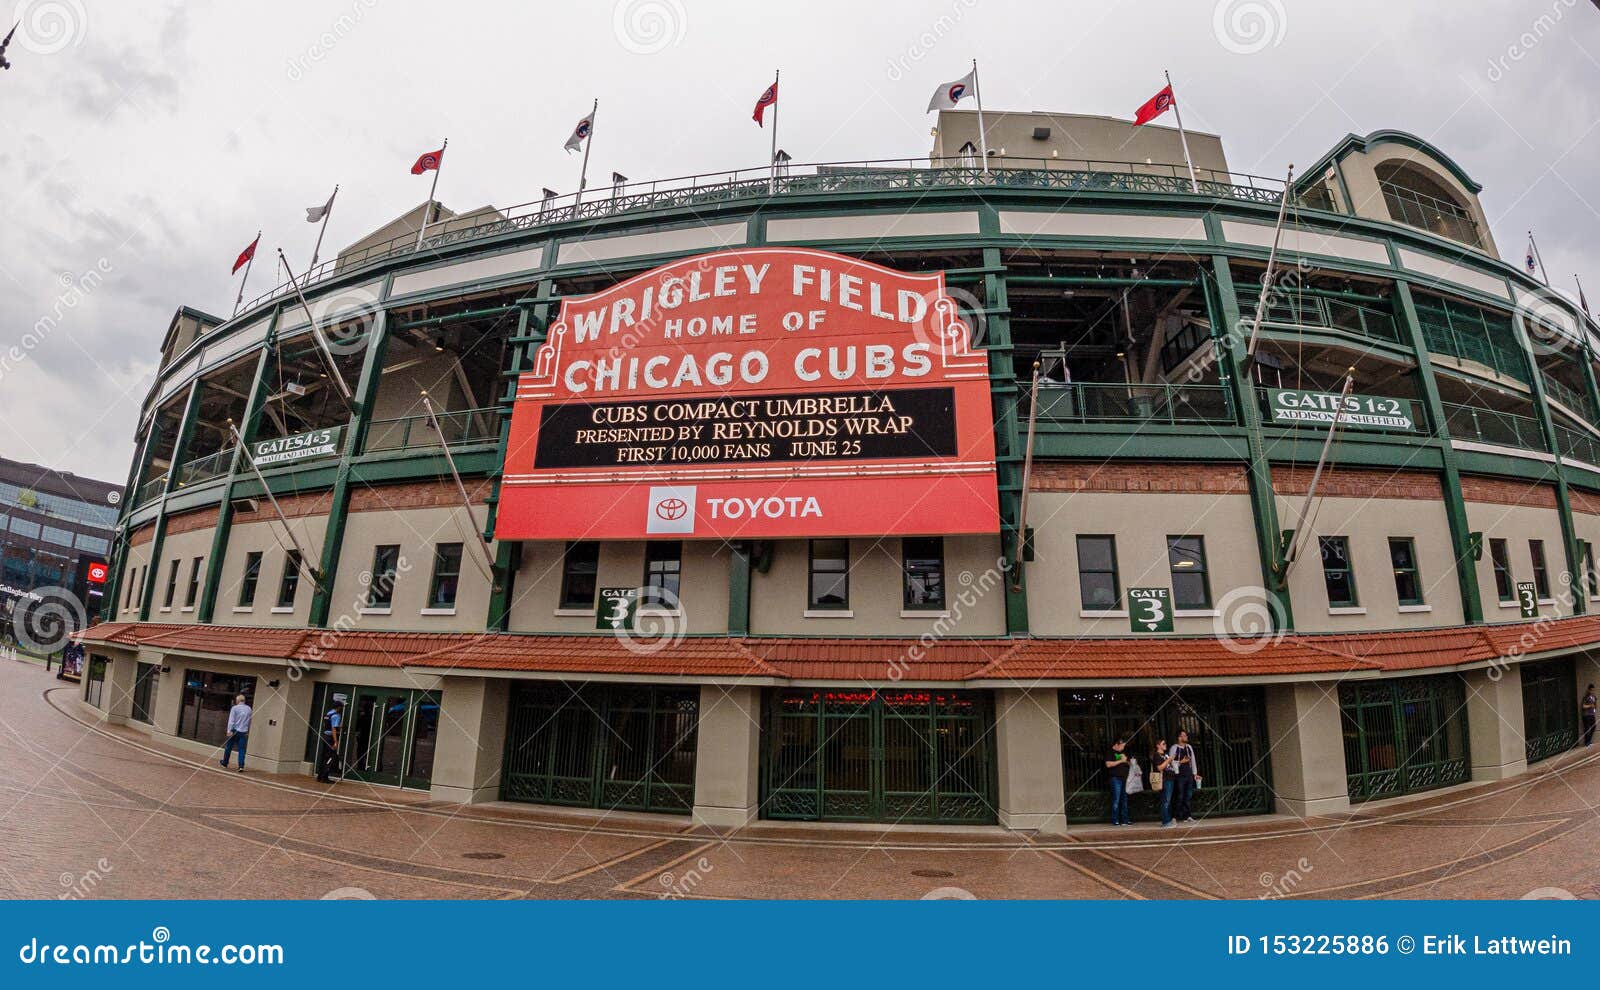 Wrigley Field Baseball Stadium - Home Of The Chicago Cubs ...